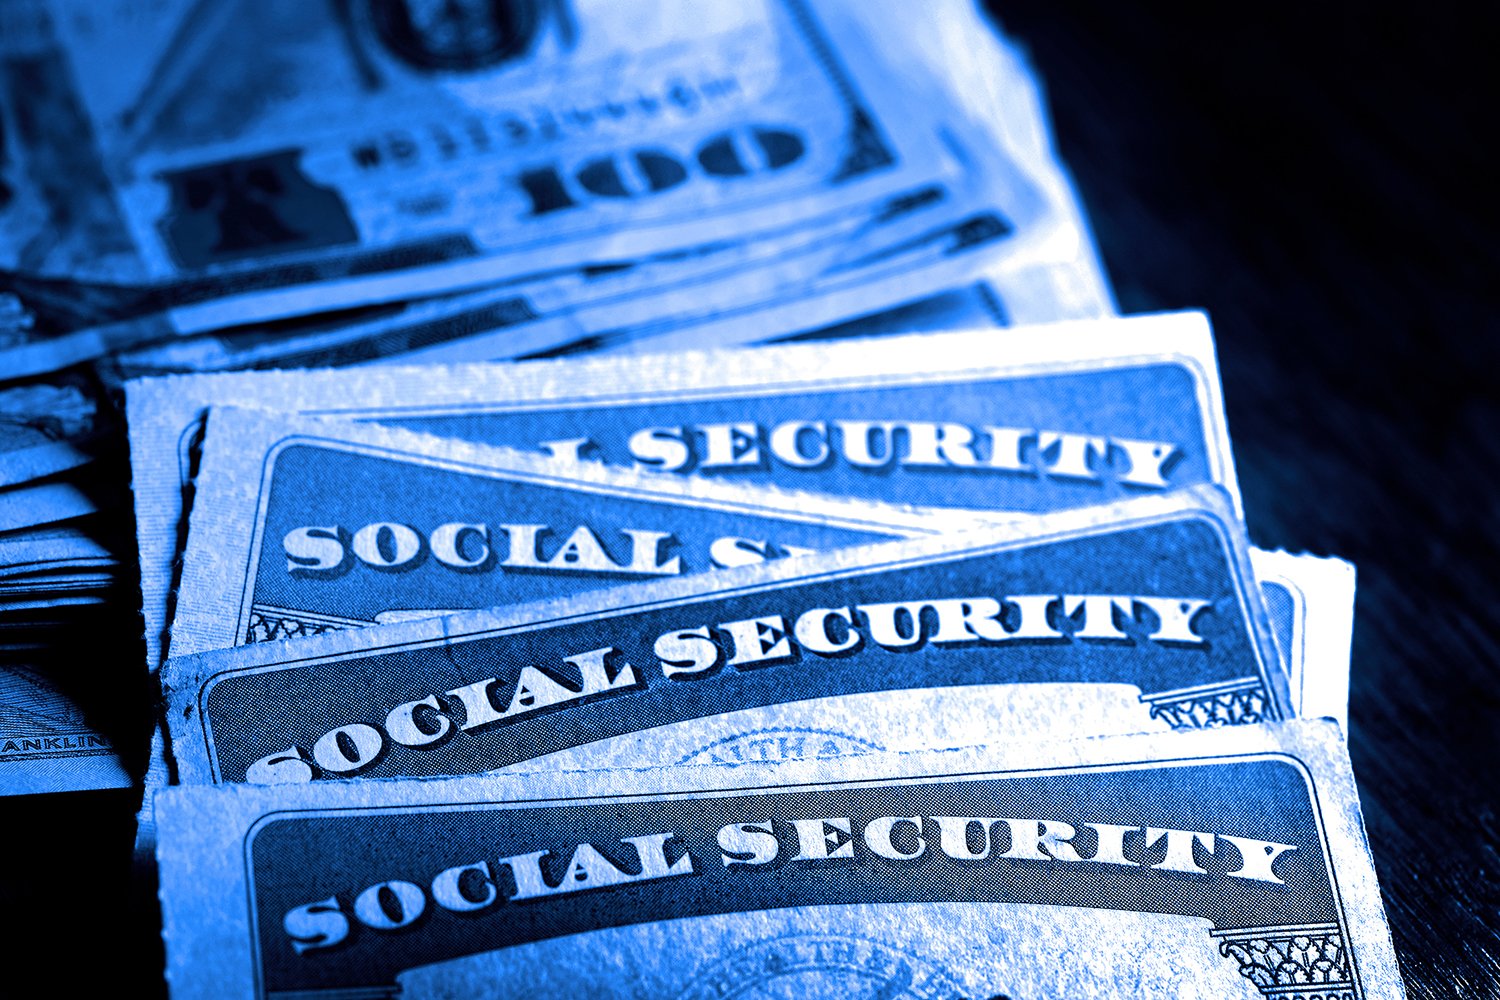 Social Security Cards with Cash